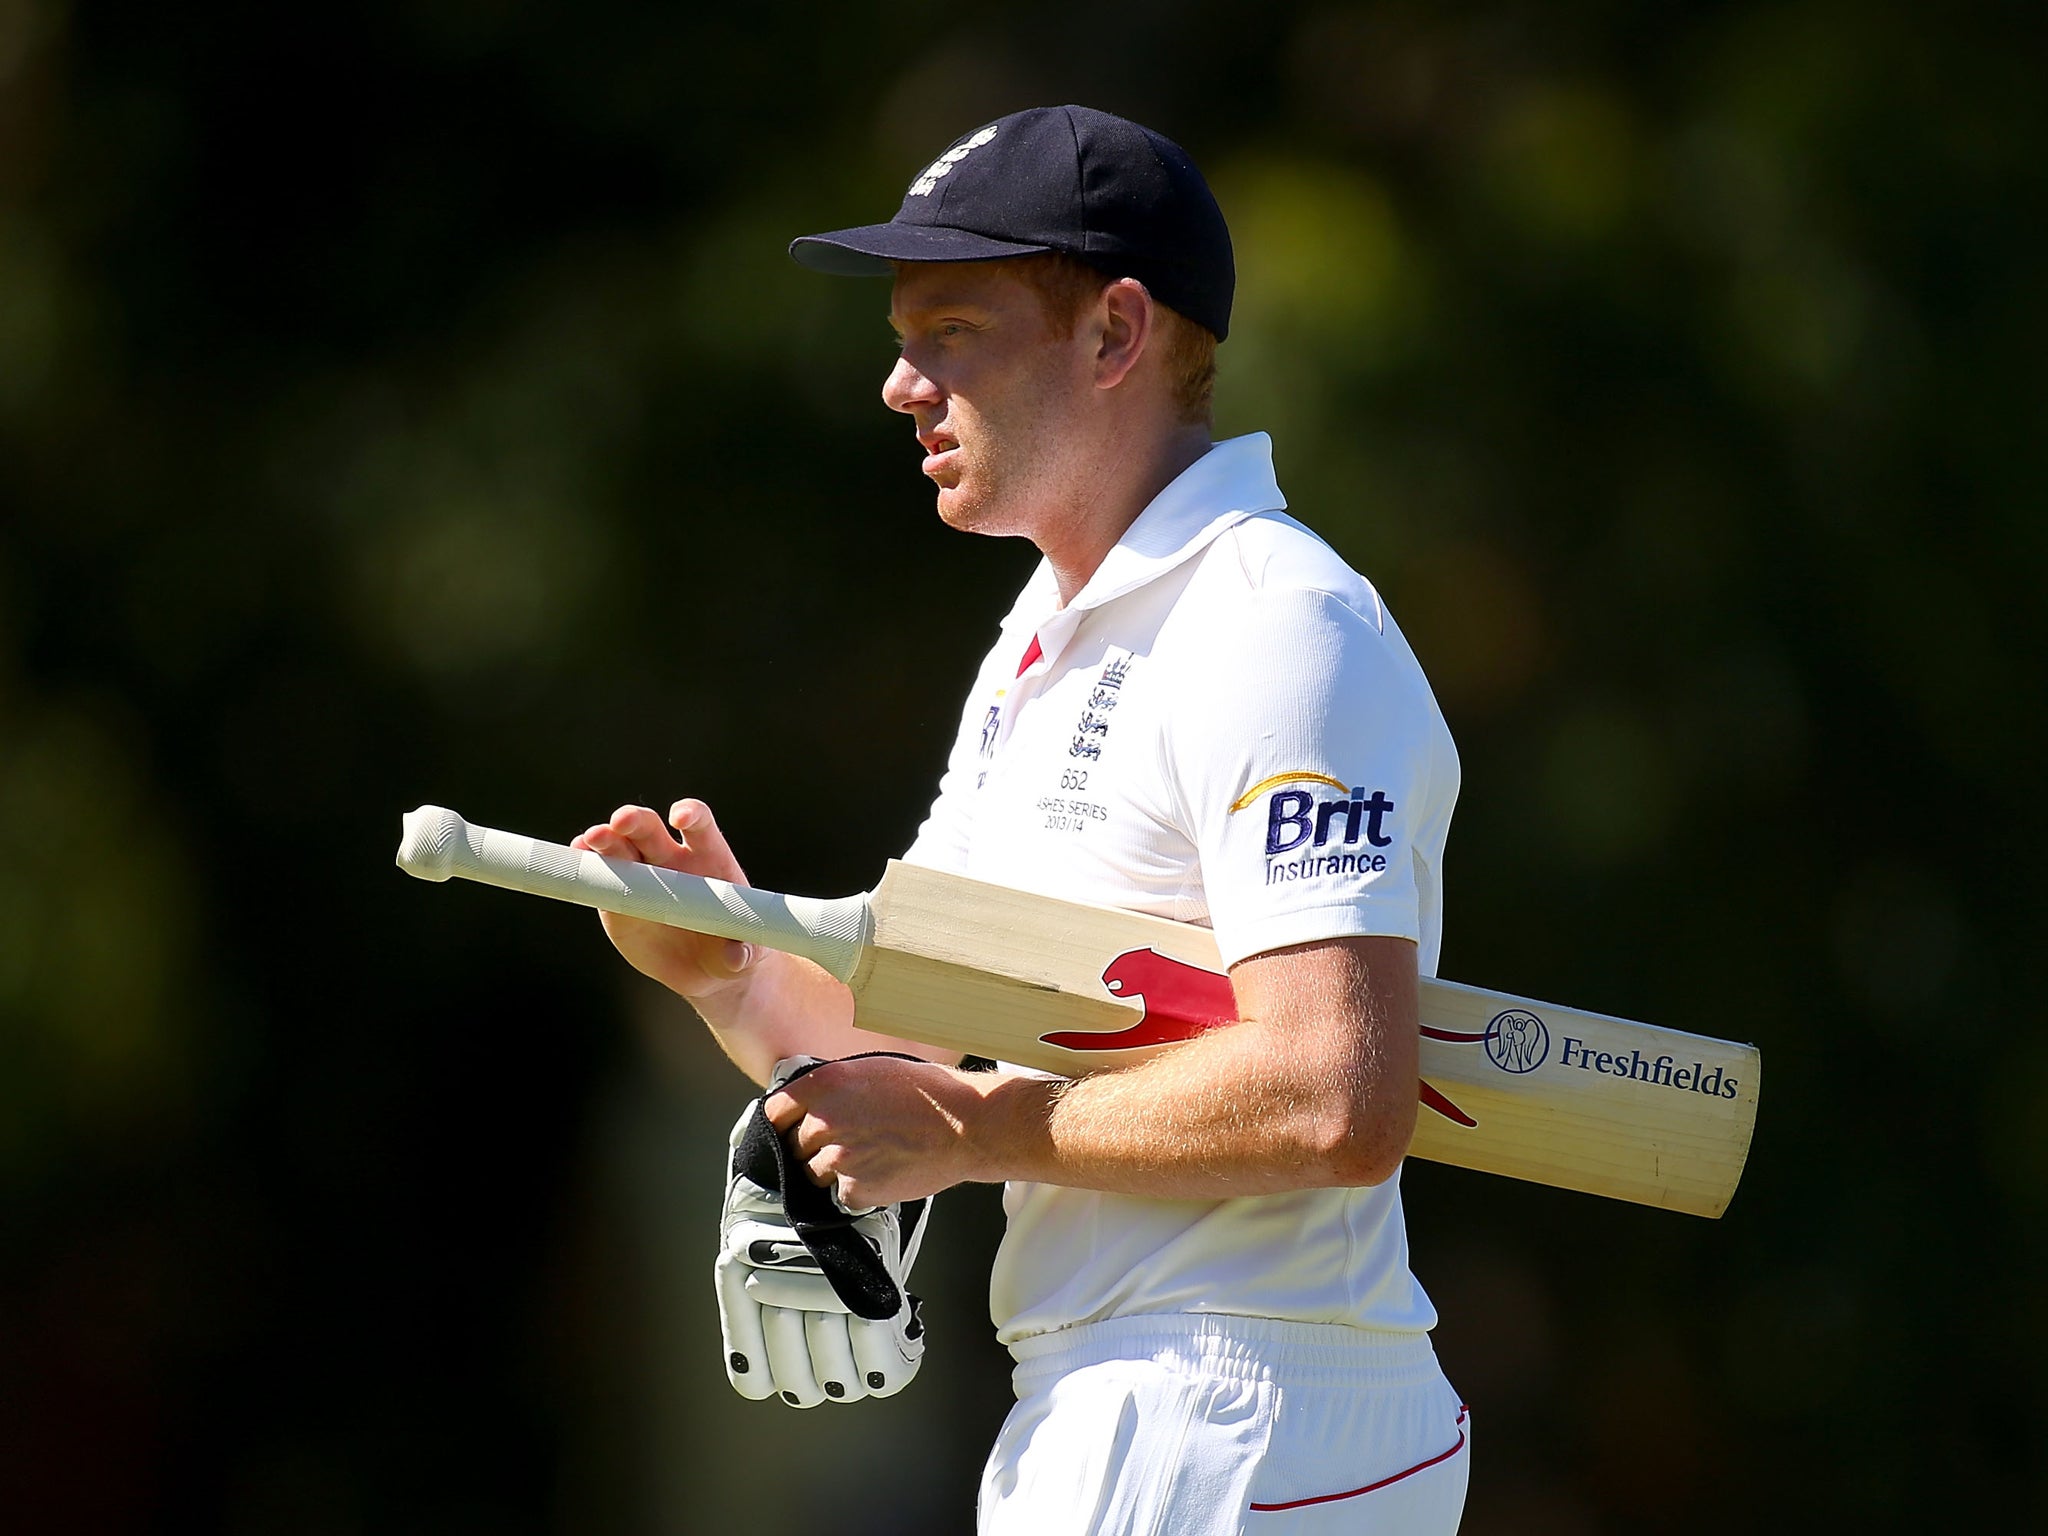 England batsman Jonny Bairstow provided selectors with a timely reminder after scoring 123 for England's Performance Programme against Western Australia 2nd XI